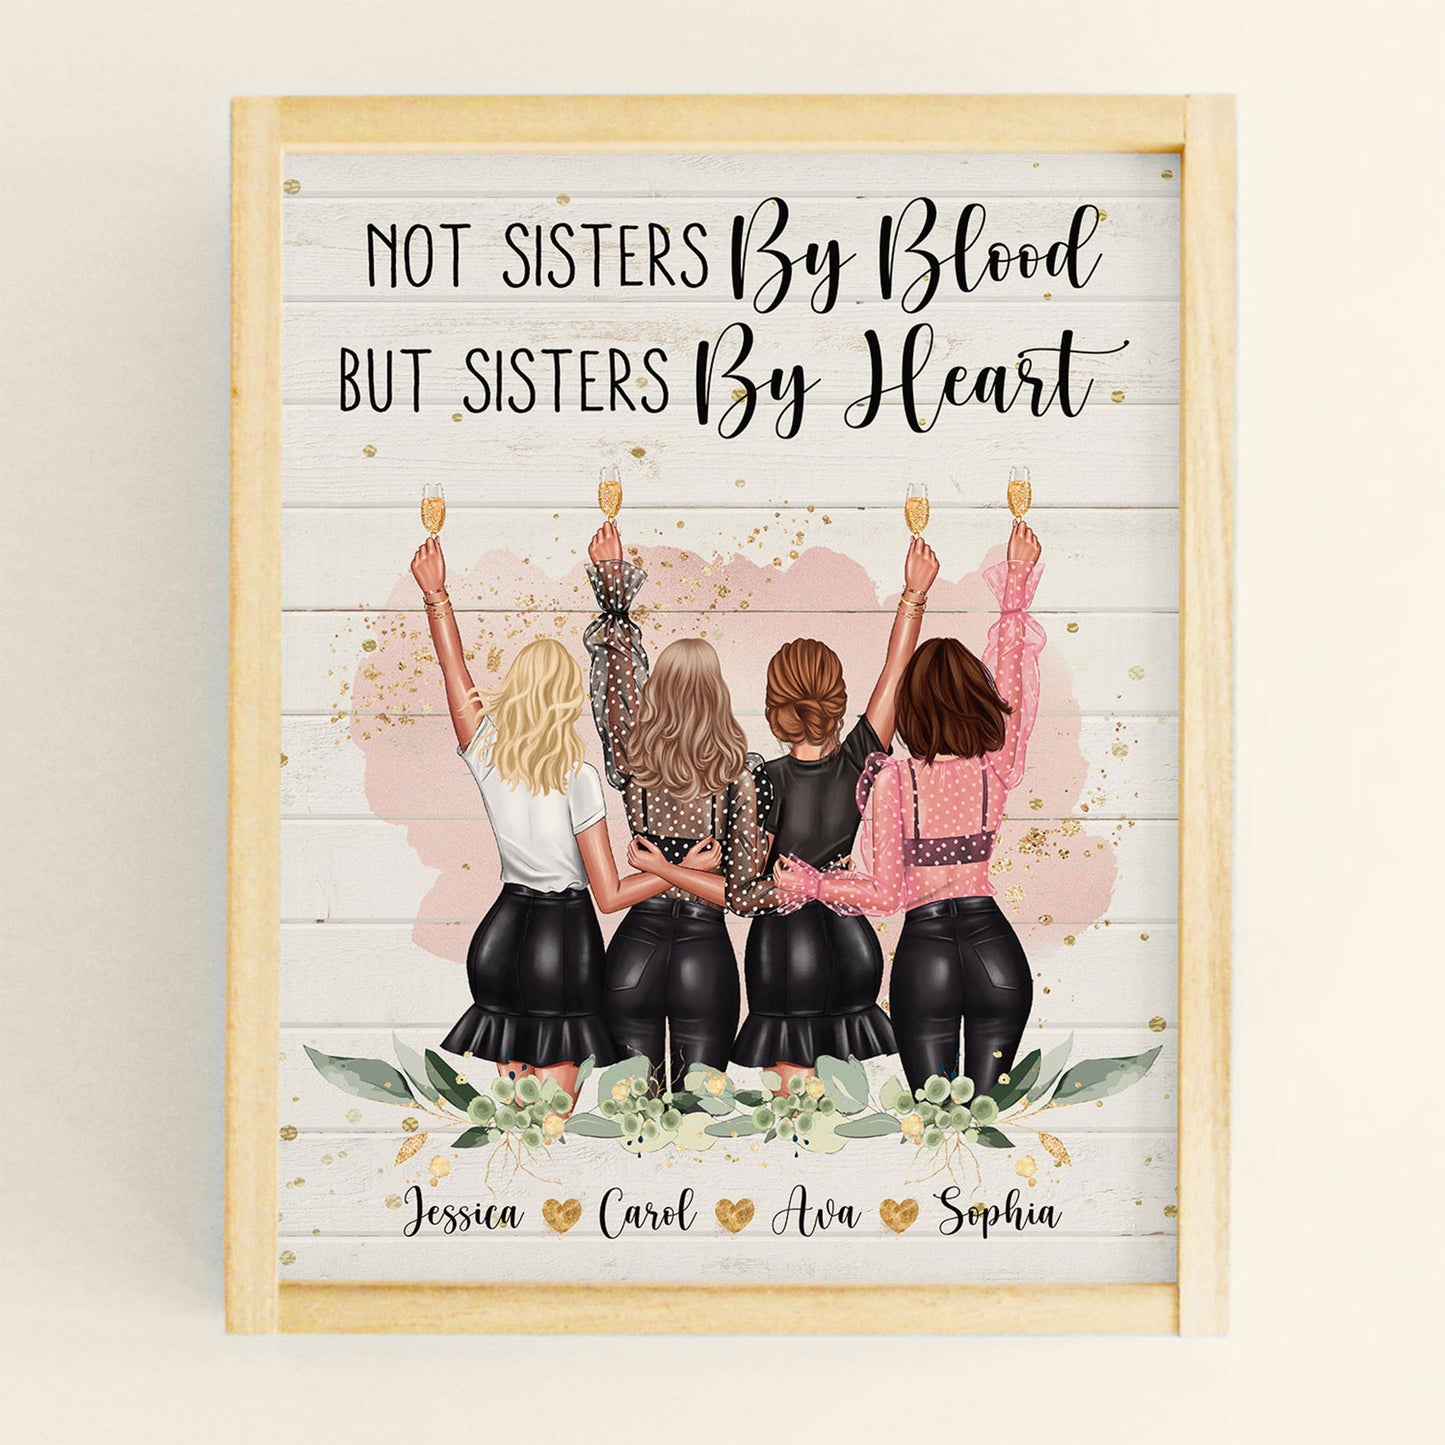 Not Sisters By Blood But Sisters By Heart - Personalized Poster - Birthday Gift For Sister, Soul Sister, Best Friend, BFF, Bestie, Friend - Party Girls Illustration